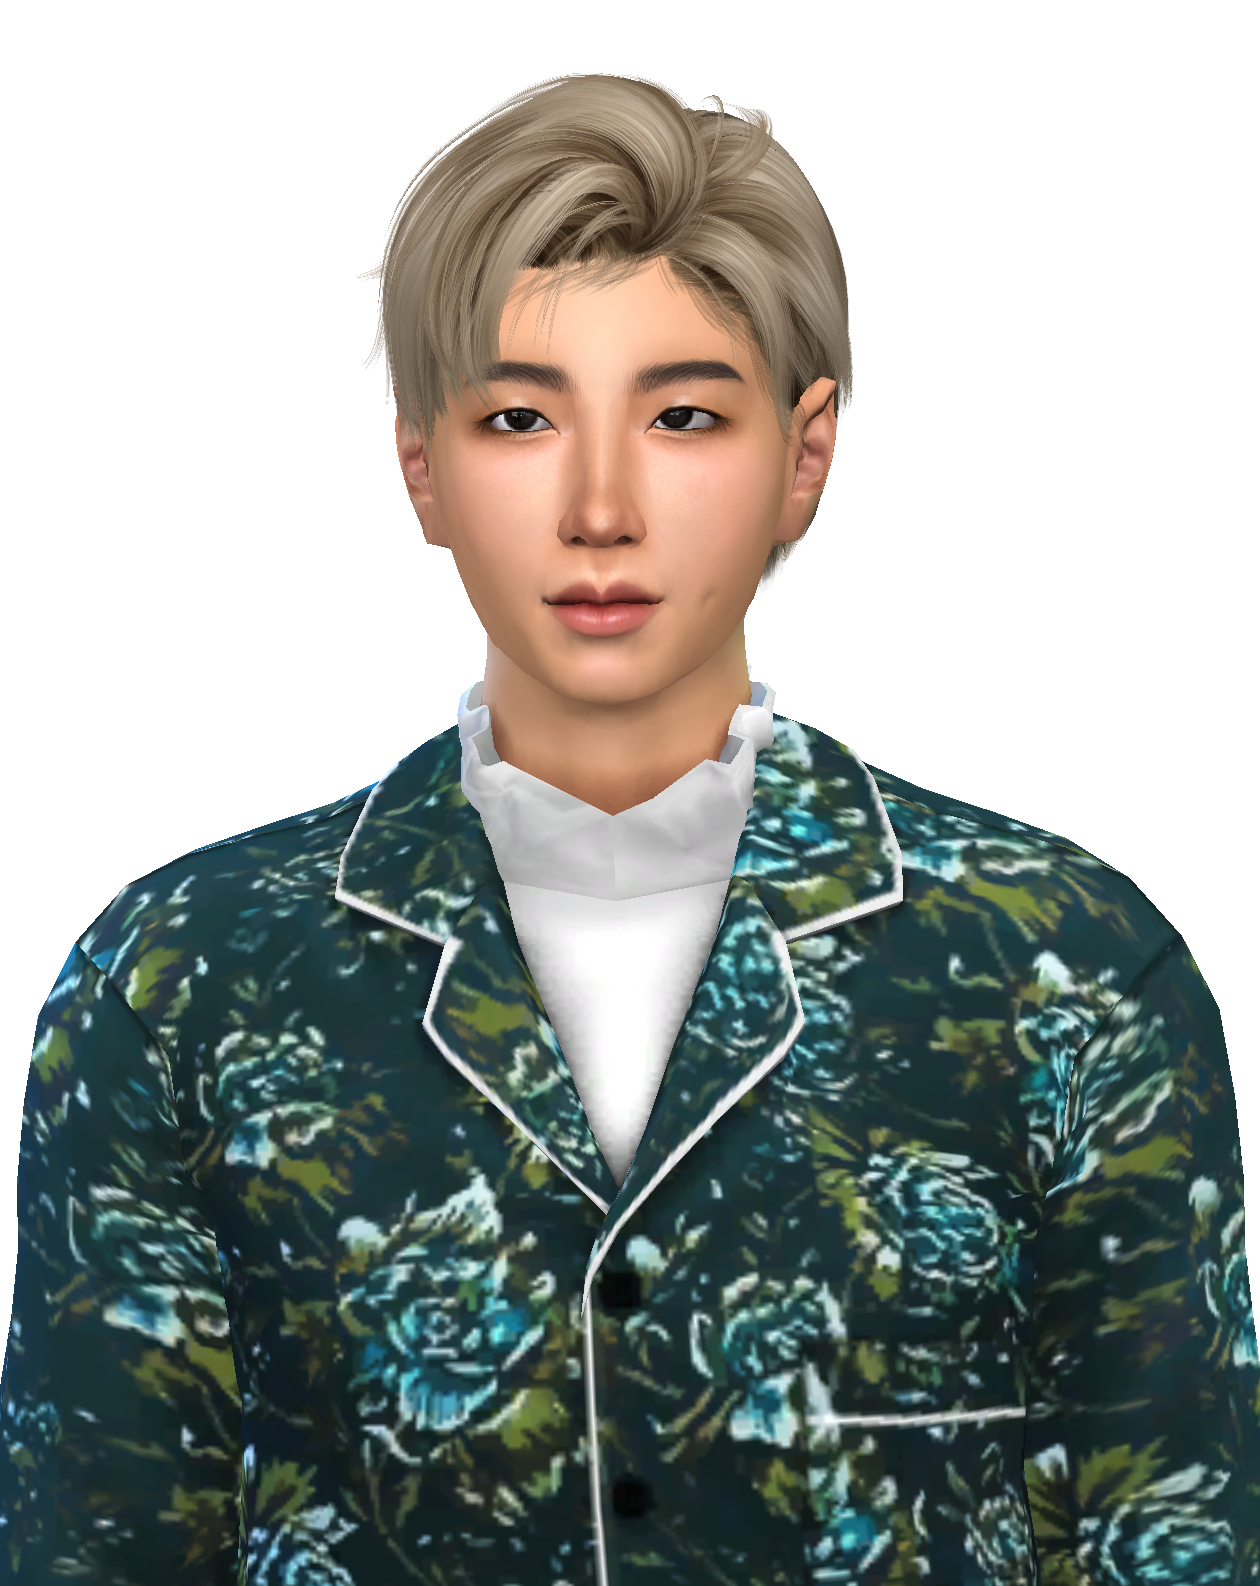 adult bts sweaters sims 4 cc